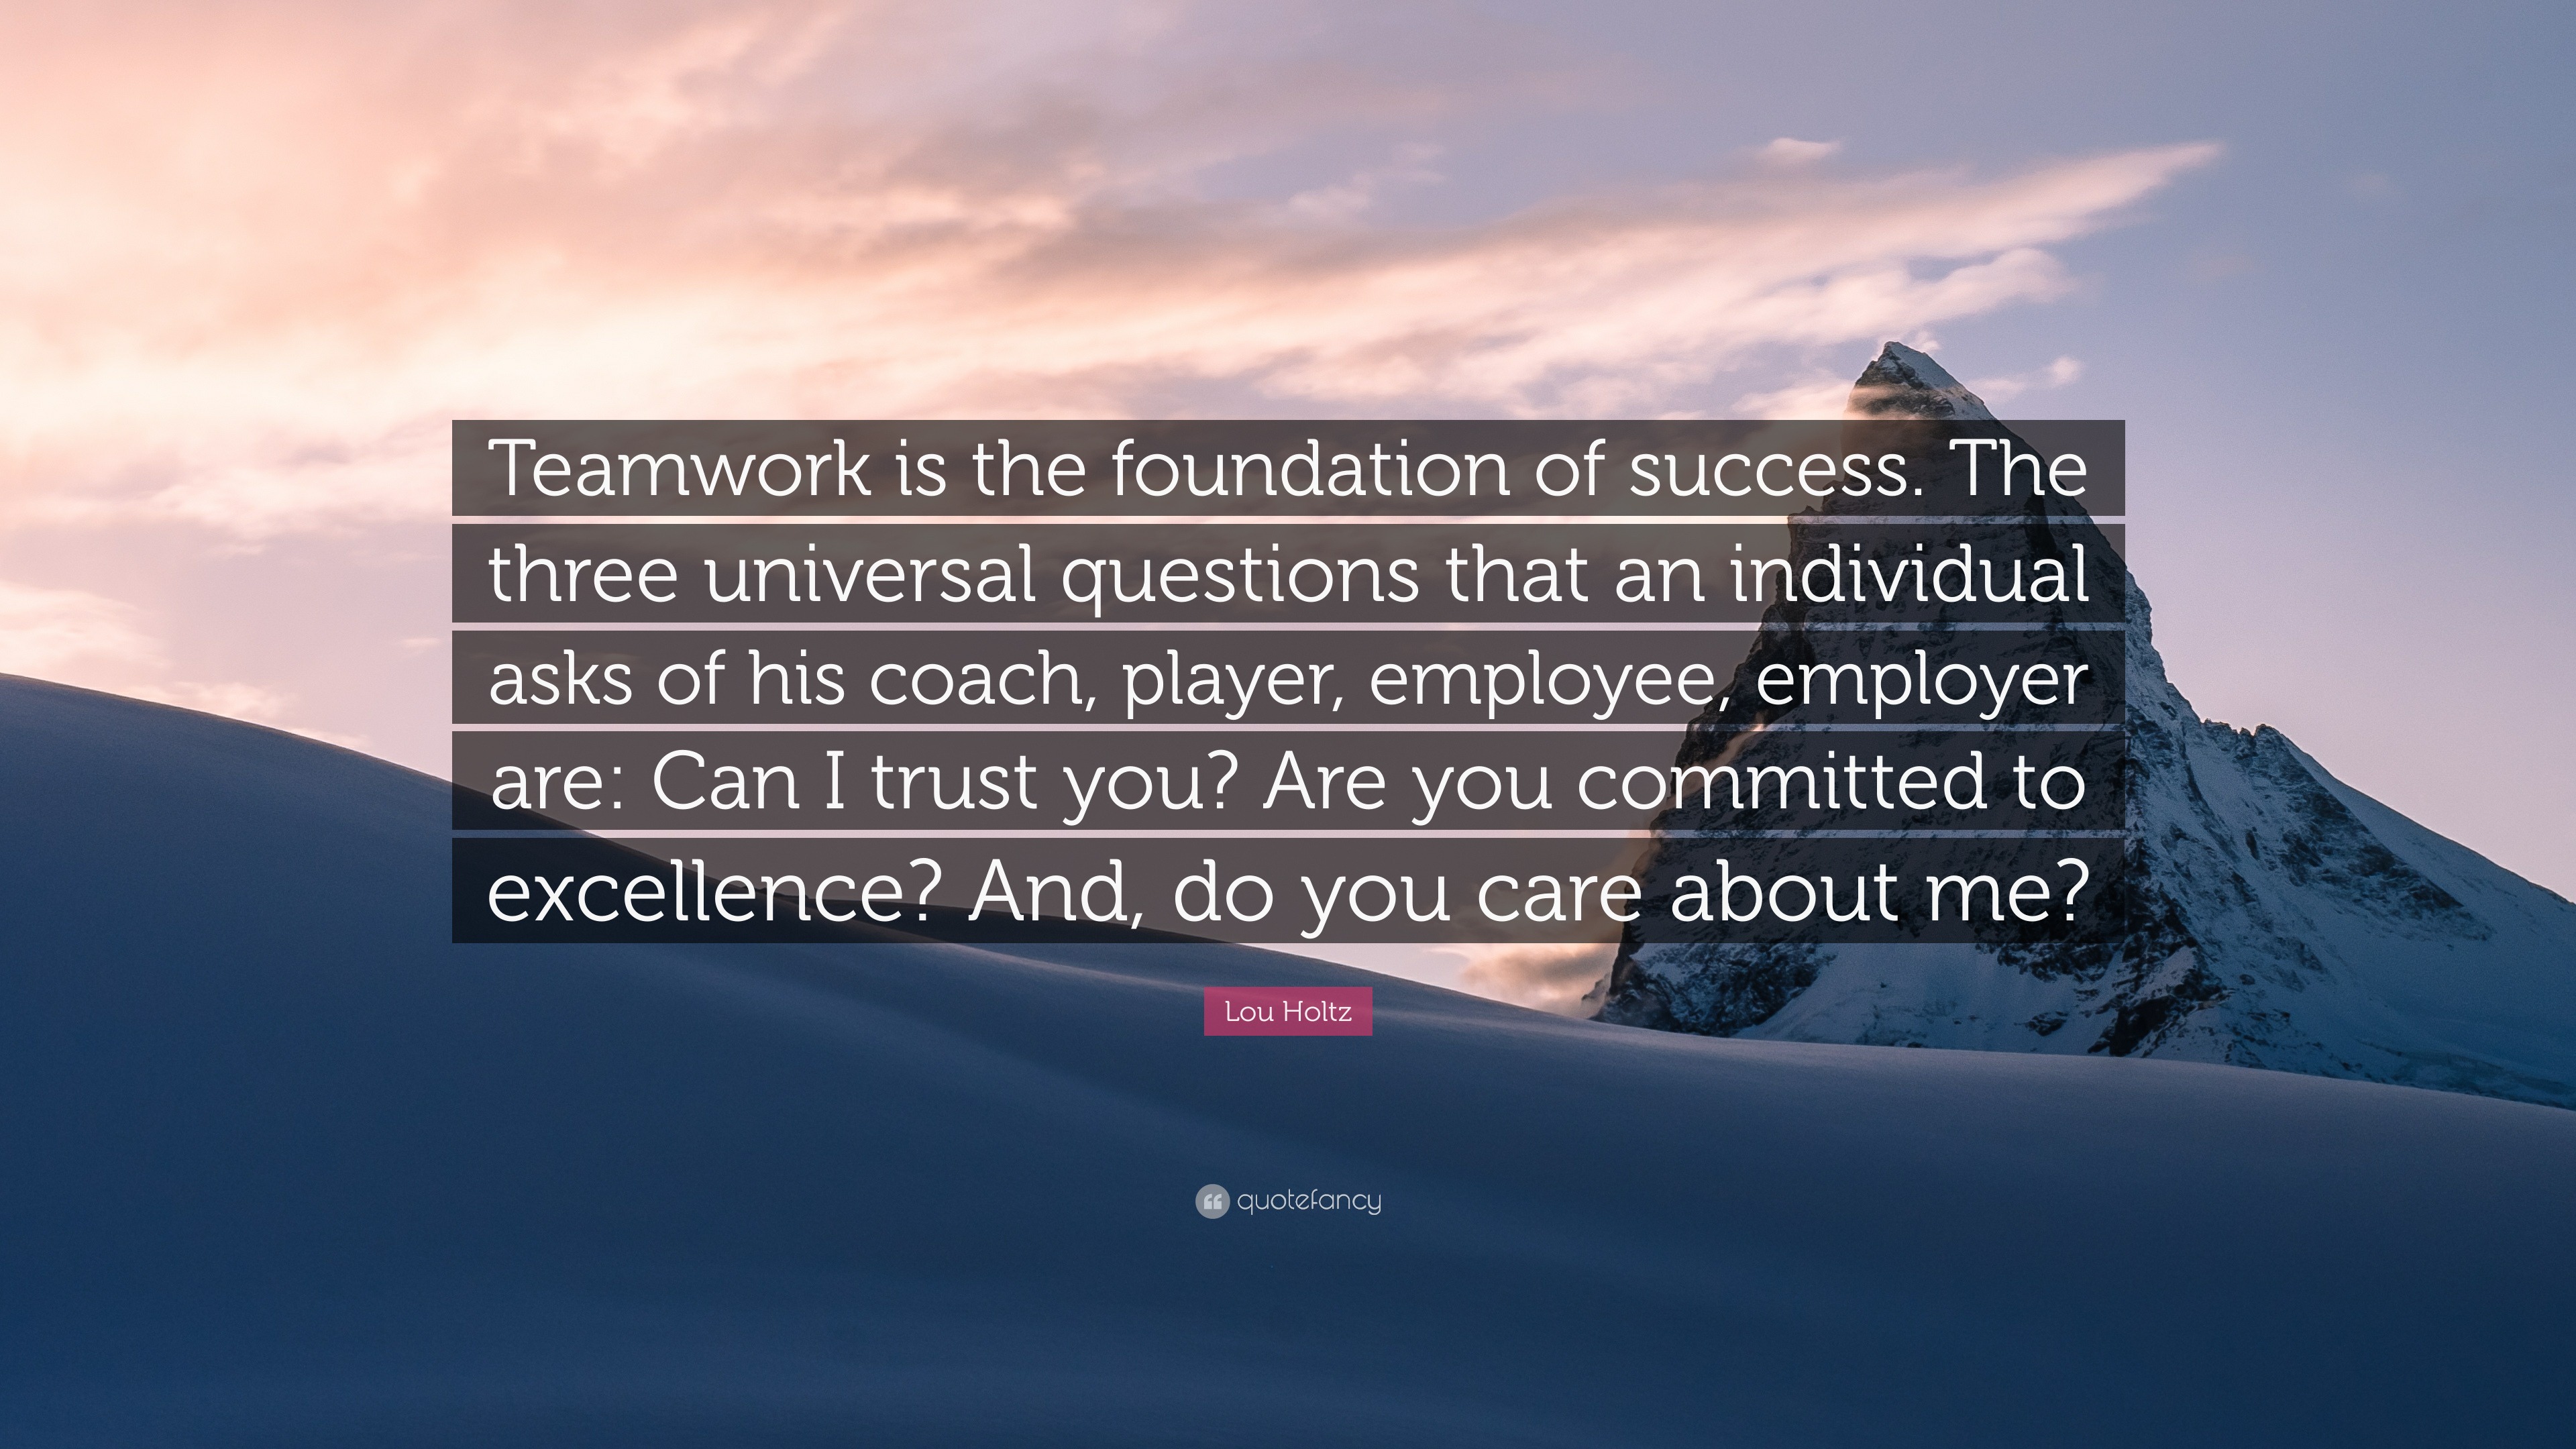 Lou Holtz Quote: “Teamwork is the foundation of success. The three